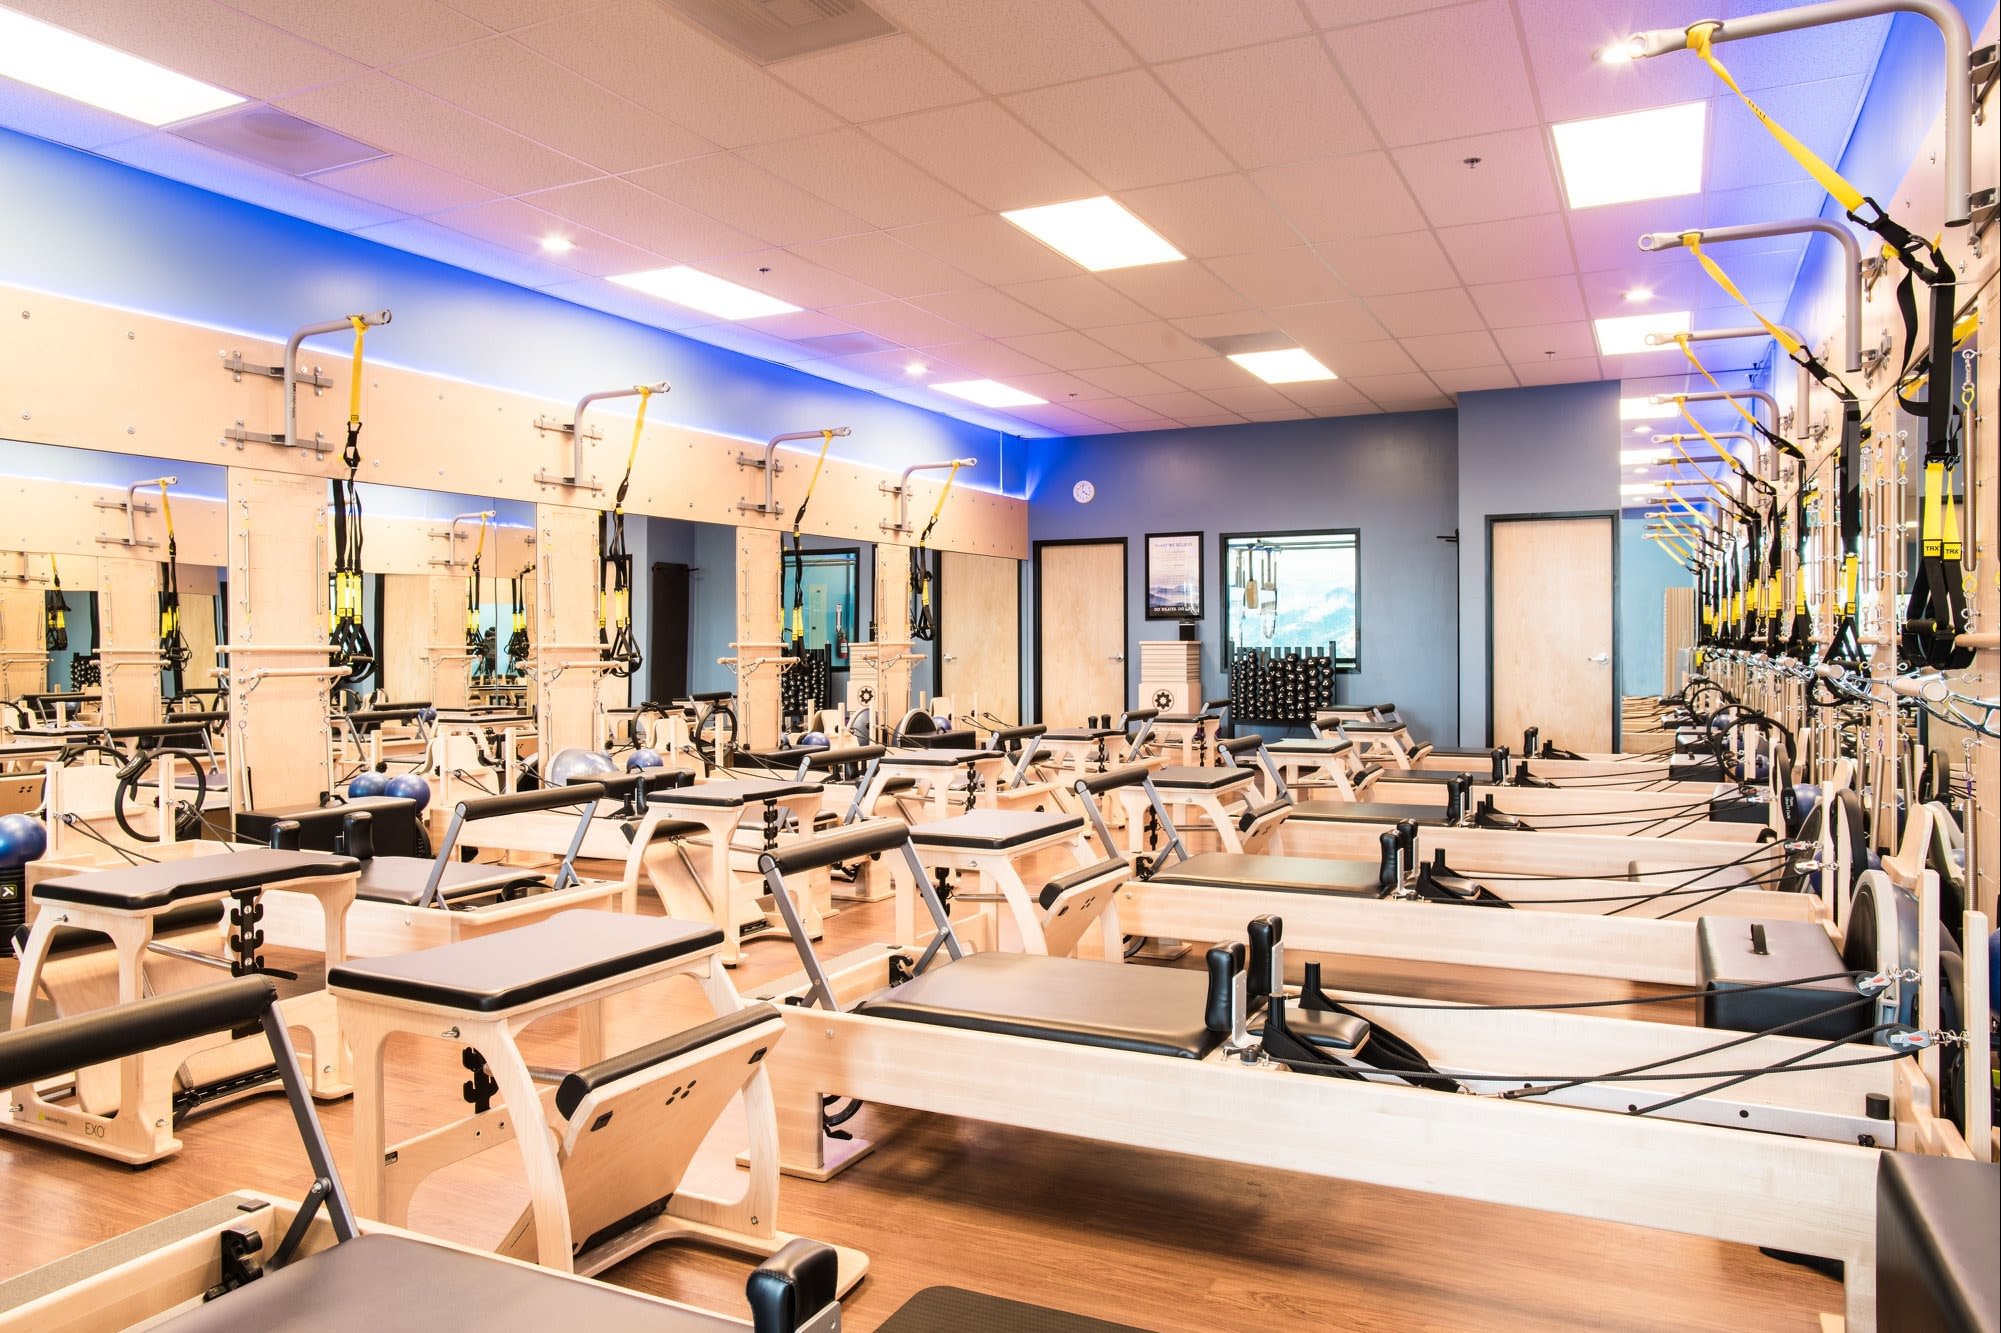 Club Pilates - Uptown: Read Reviews and Book Classes on ClassPass